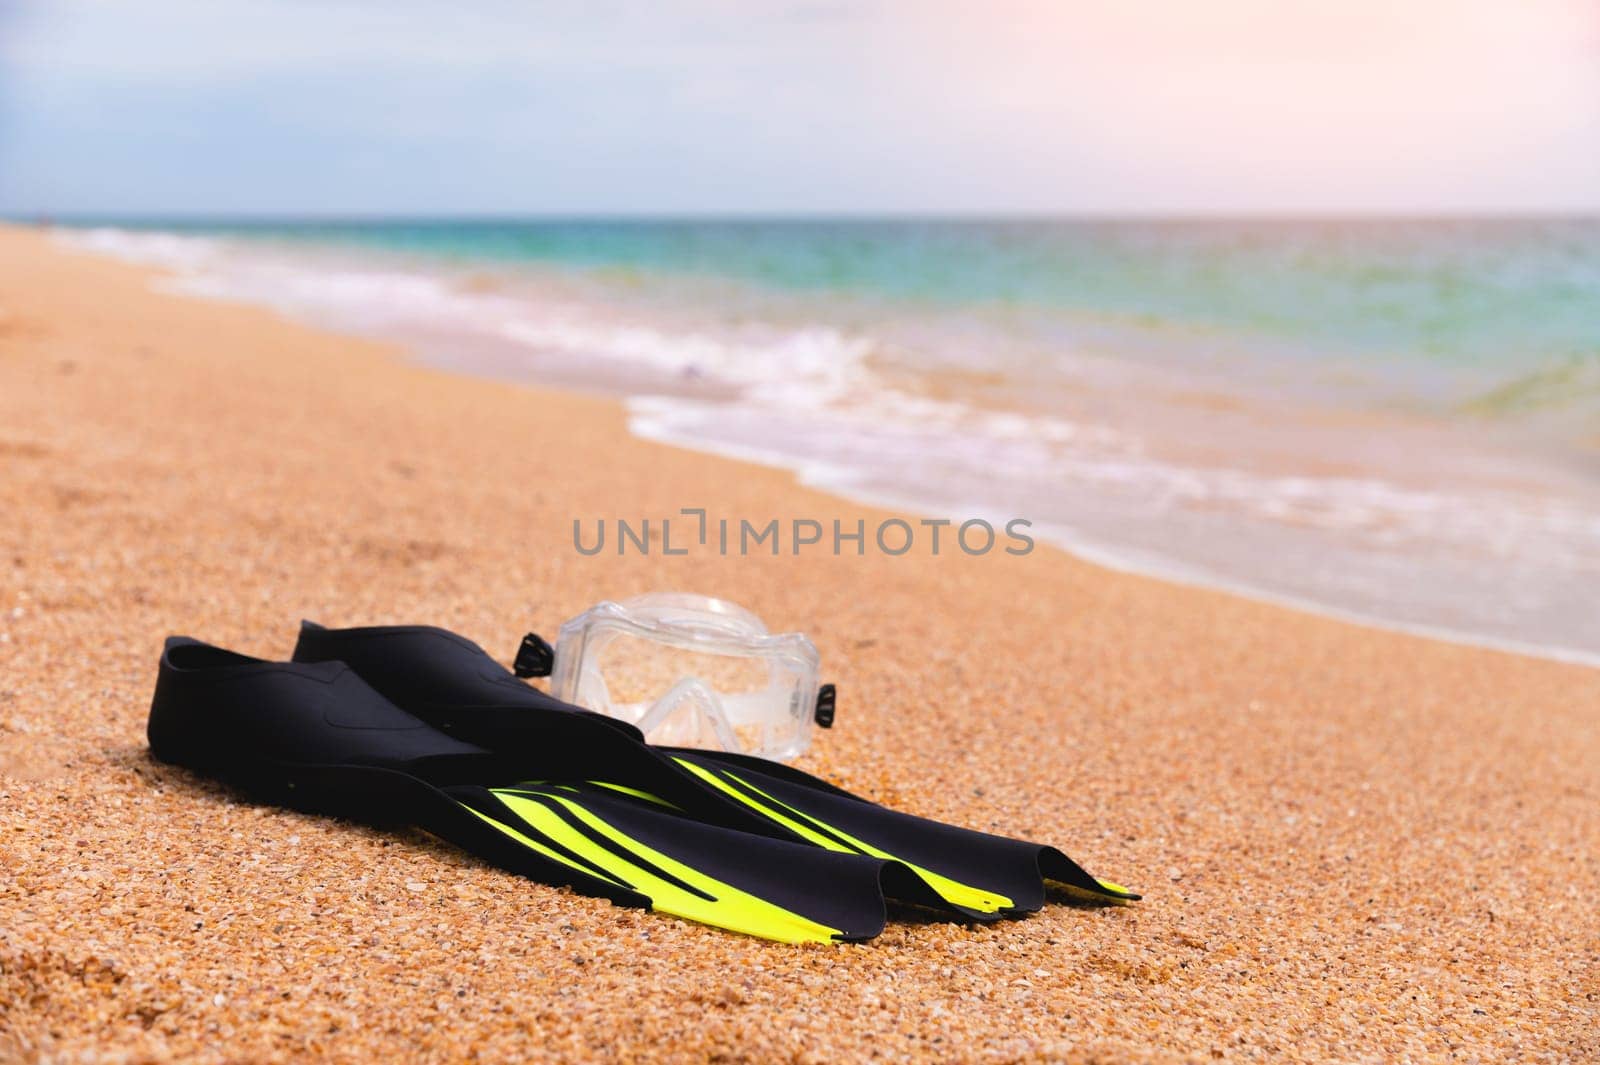 Snorkeling mask and fins on a tropical beach. Black fins on the seashore close-up.